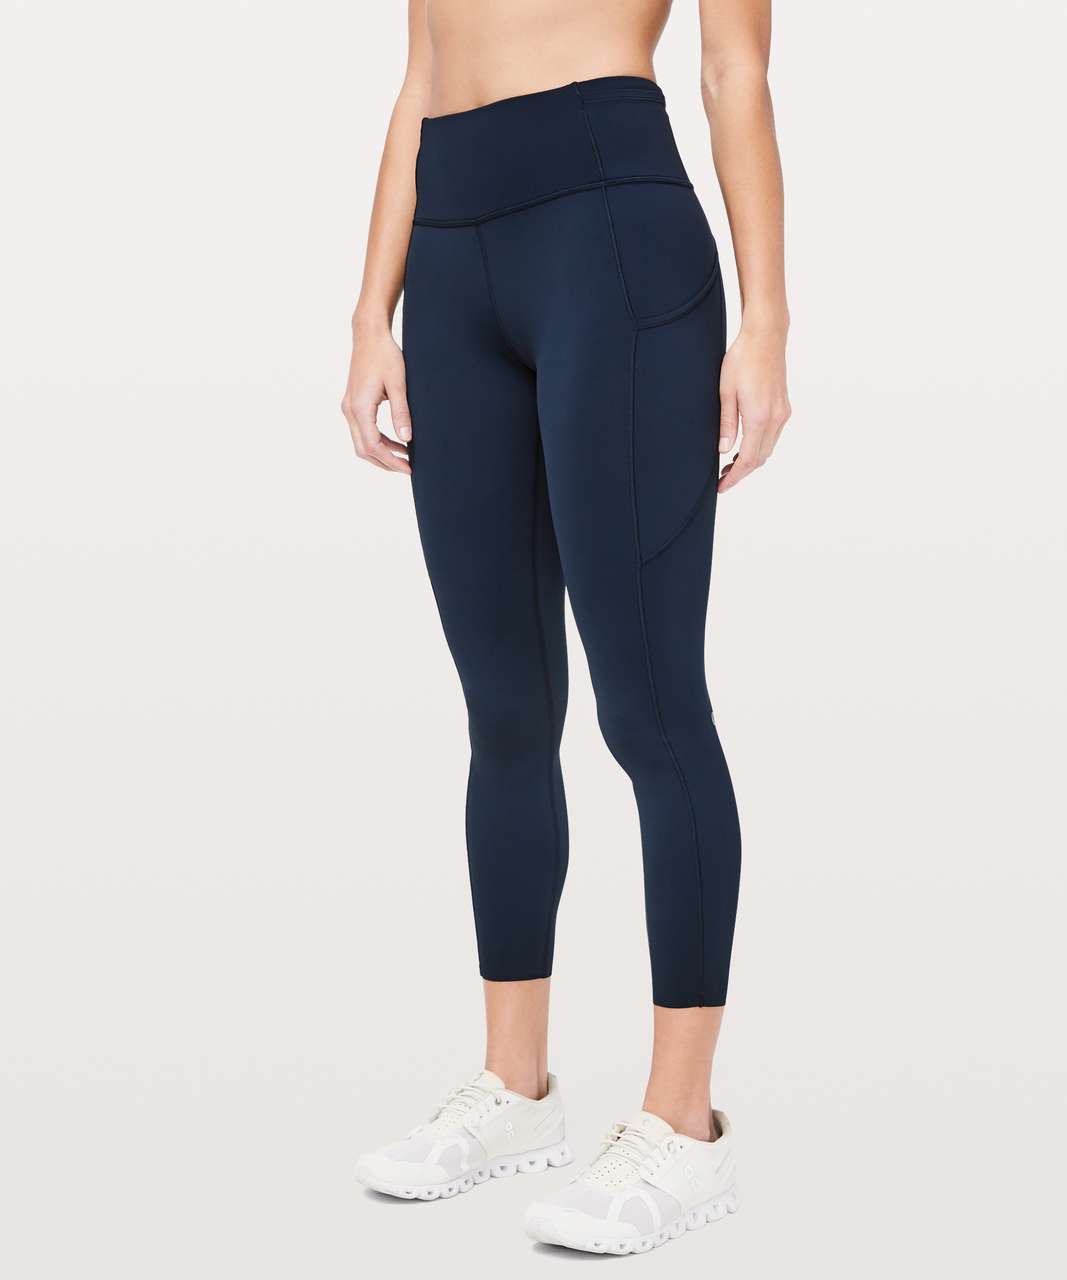 Lululemon, Fast and Free Tight II 25 Non-Reflective Larkspur Blue 4 W5BXQS